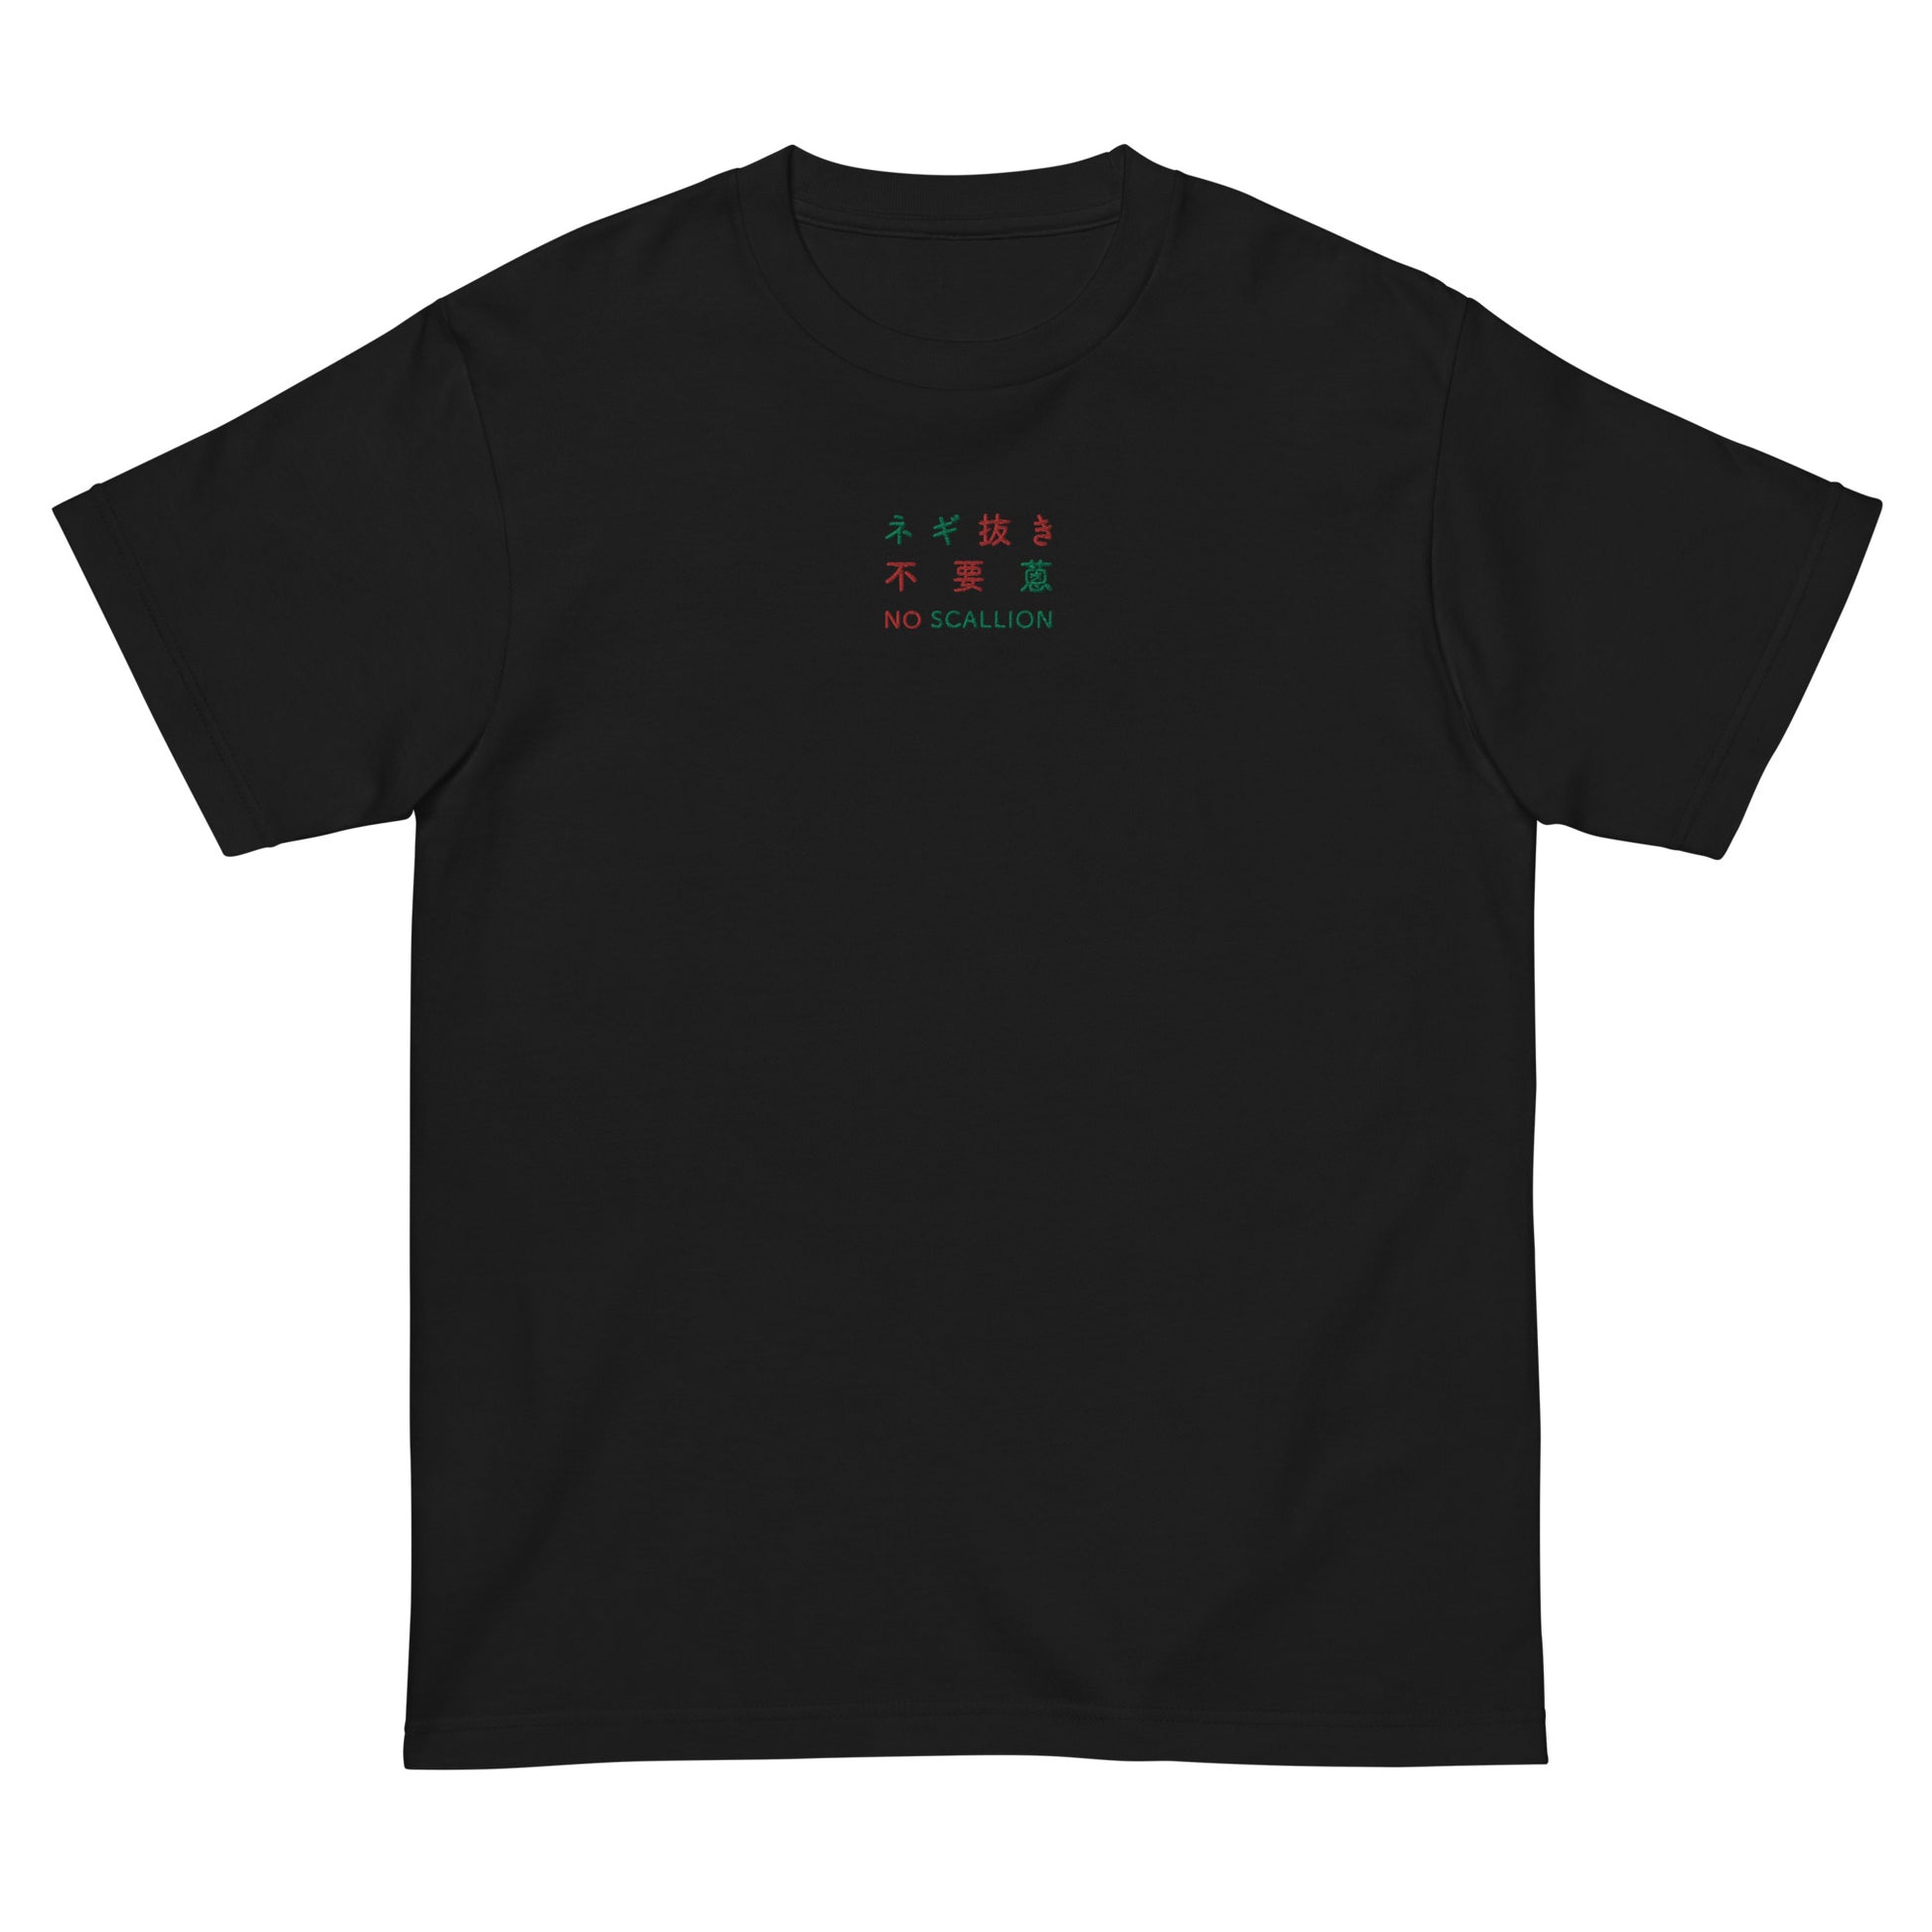 Black High Quality Tee - Front Design with Red/Green Embroidery "NO SCALLIONit" in English, Japanese and Chinese